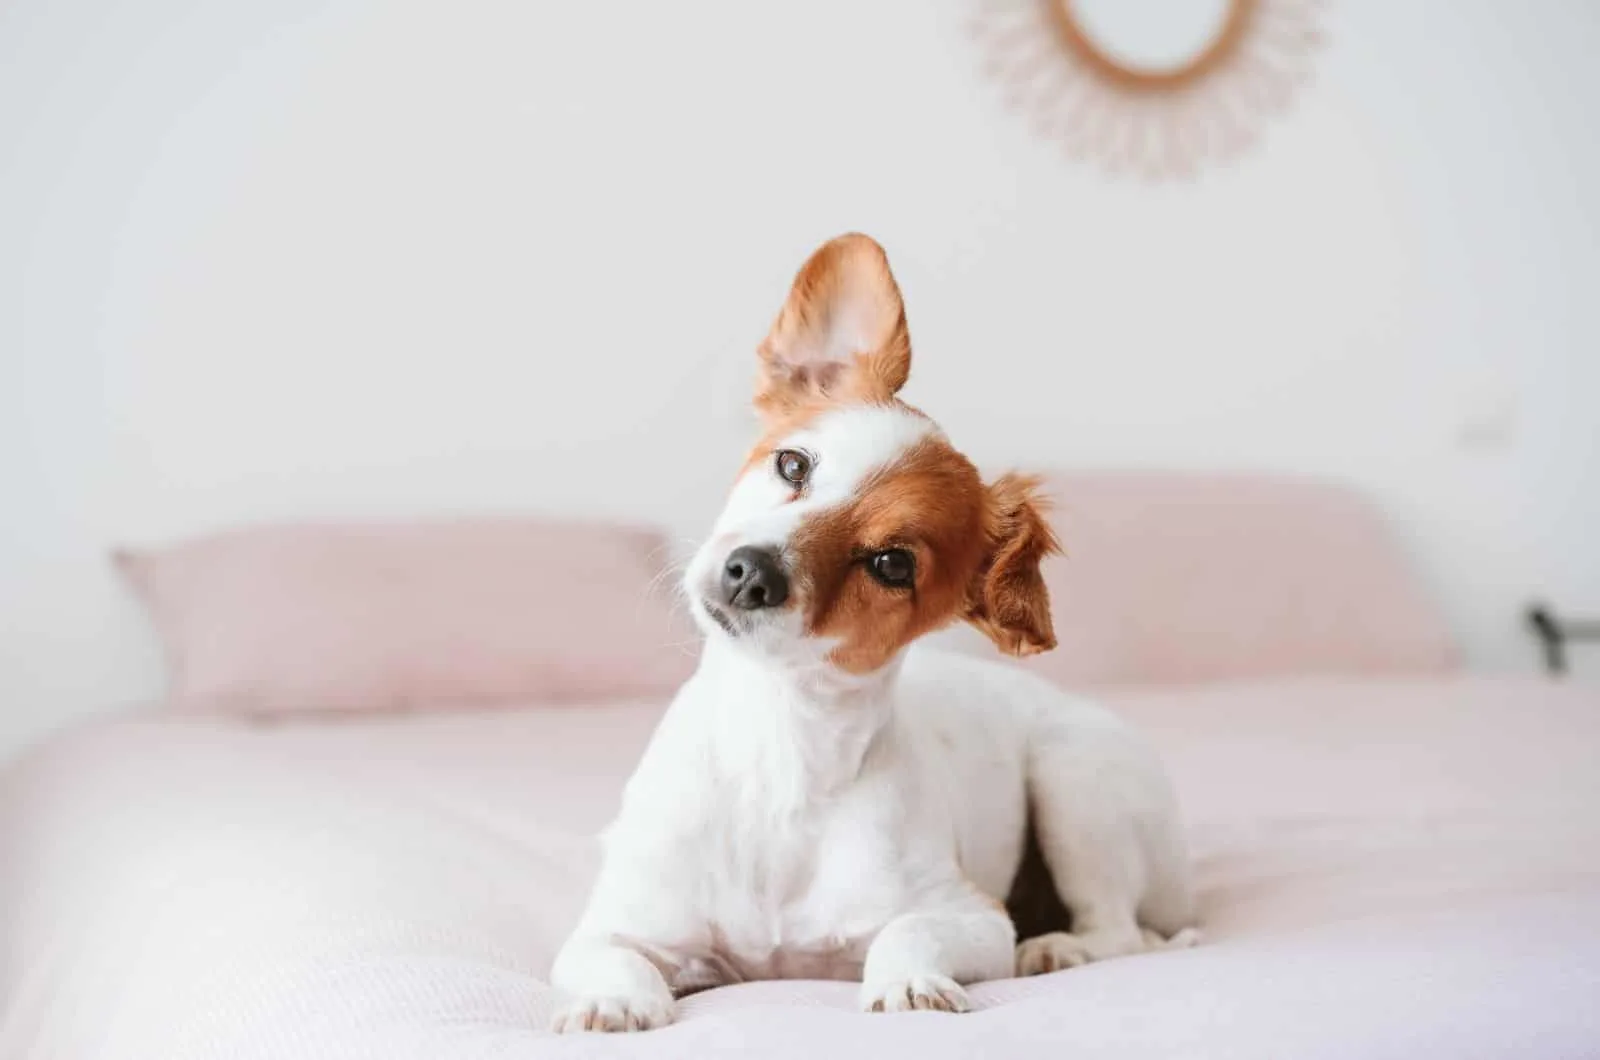 Jack Russell Terrier sitting on bed